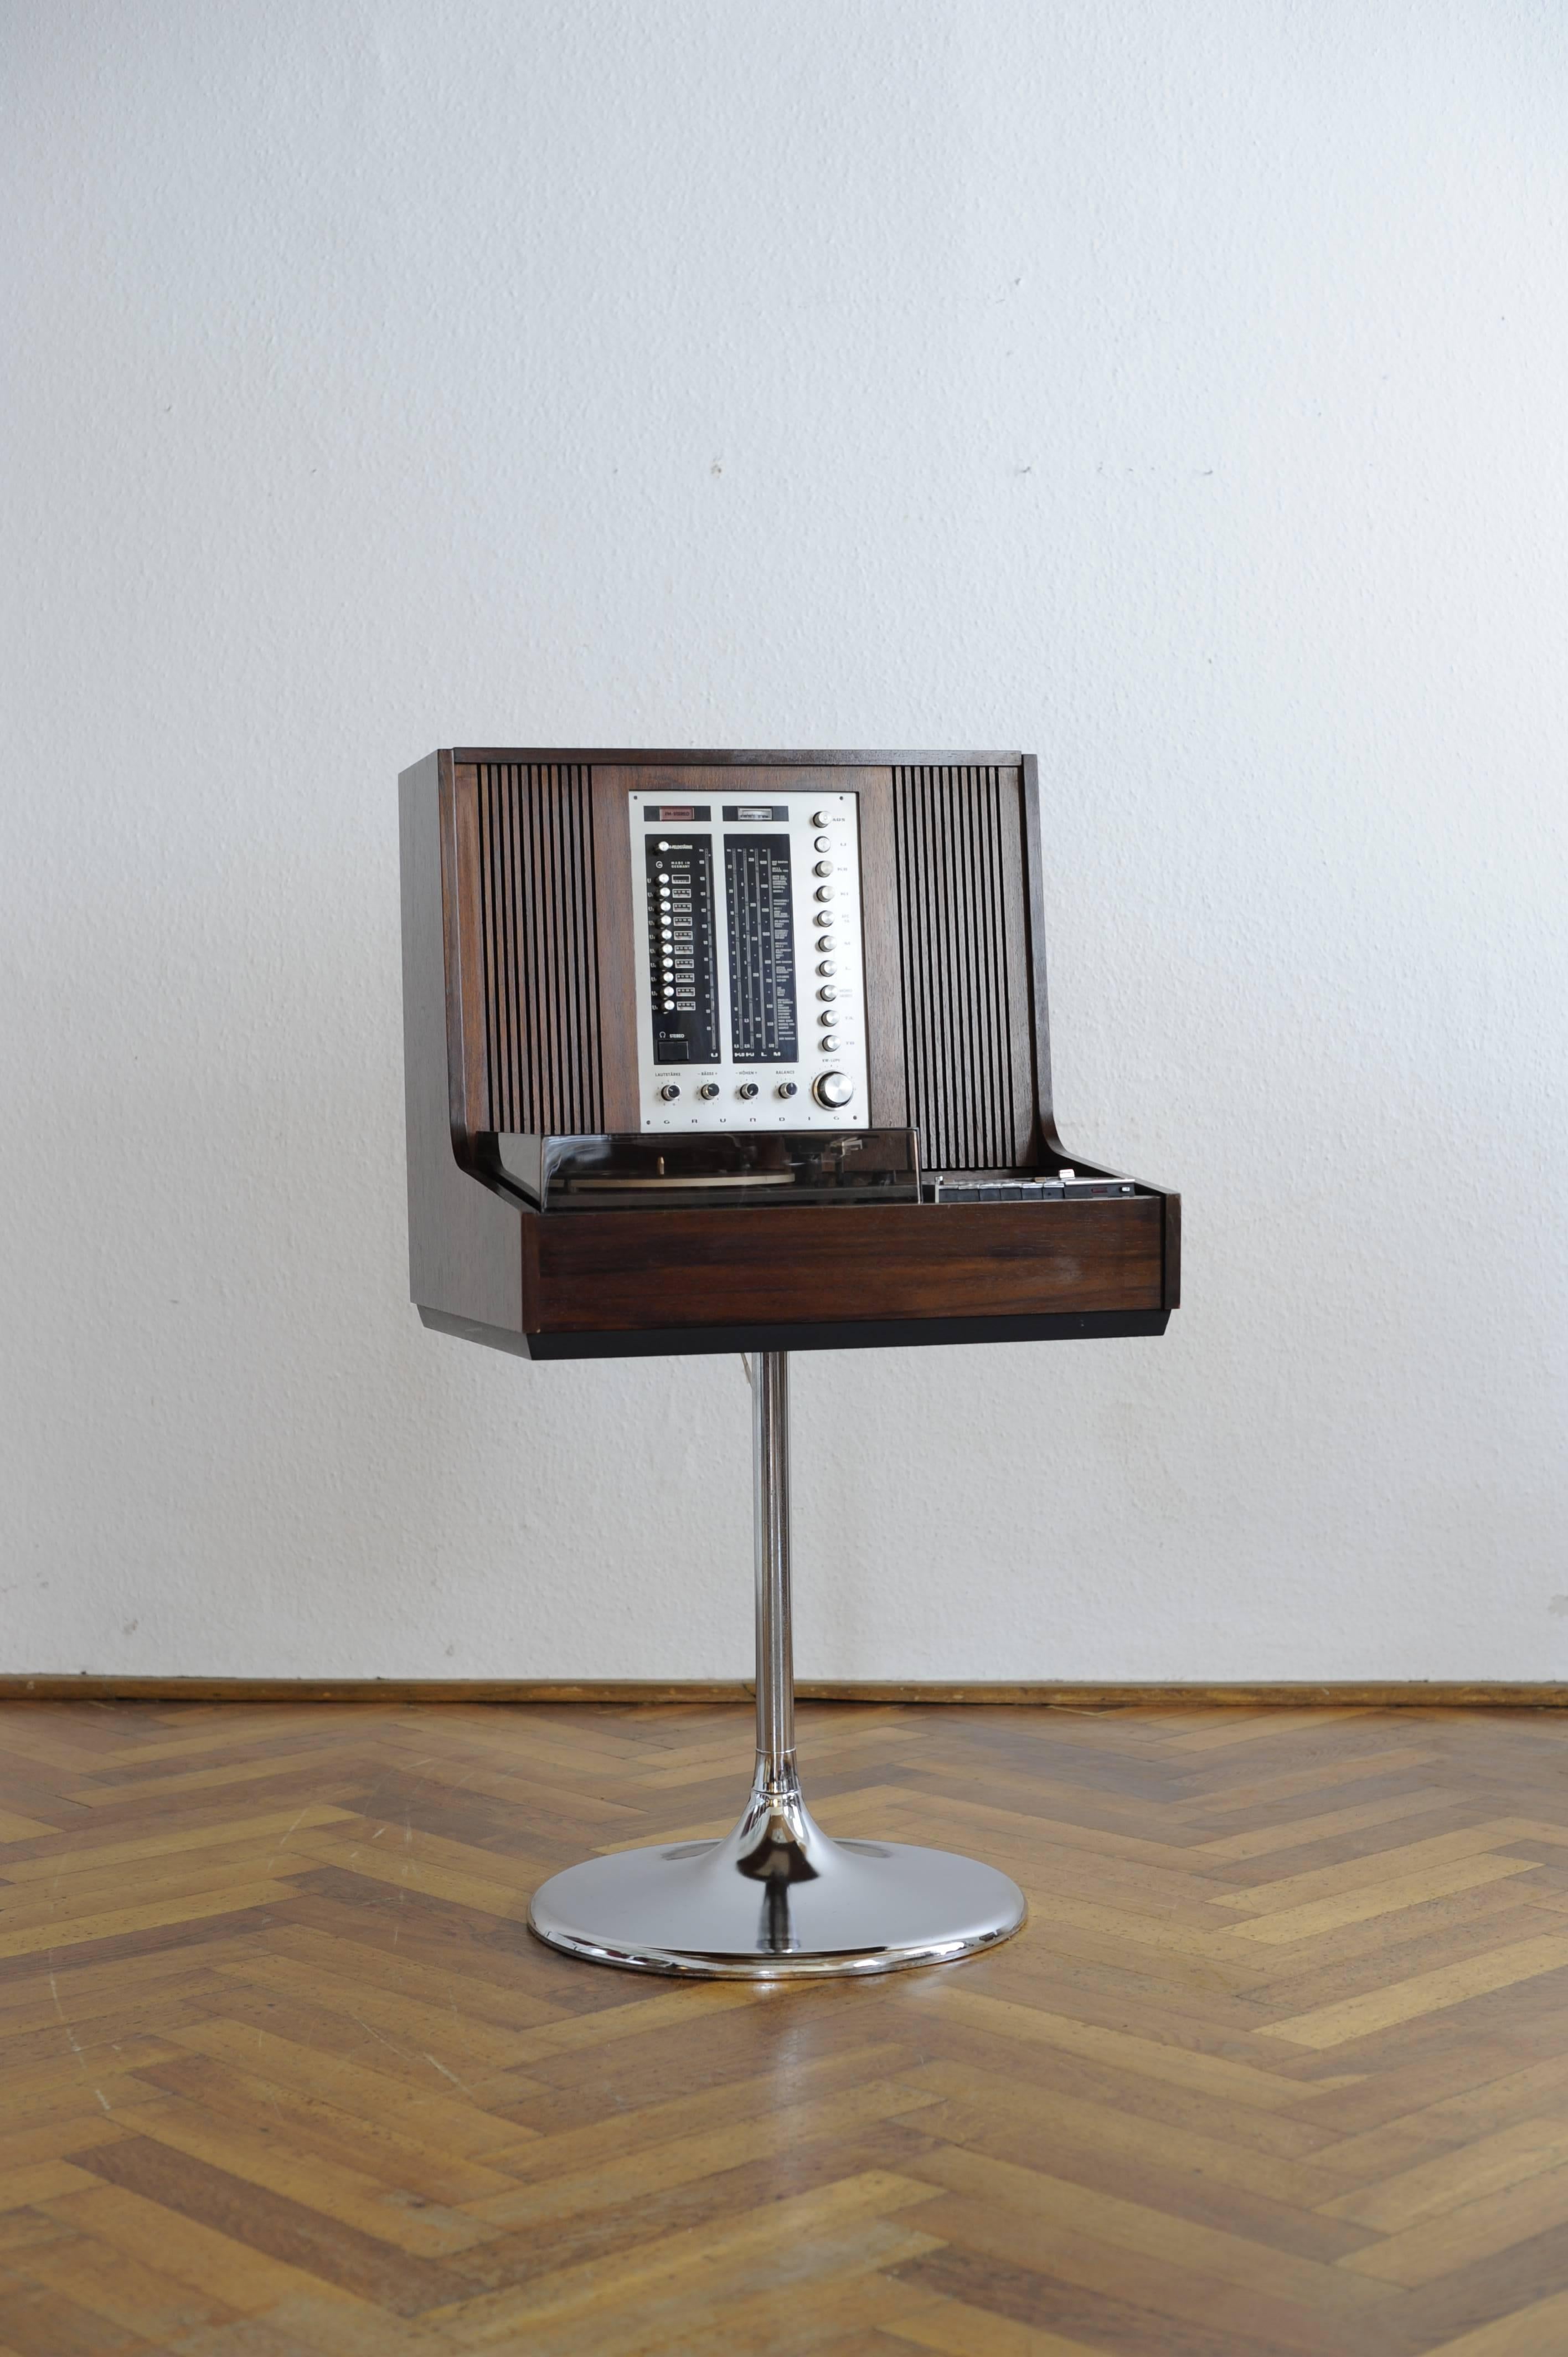 Attention, all you design high fidelity system fanatics!
There is this extremly stylish and cool looking Brown Rosita Stereo Hifi Record Player Grundig Radio Receiver Stereo System on this very cool chrome tulip stand.
This is definitely the